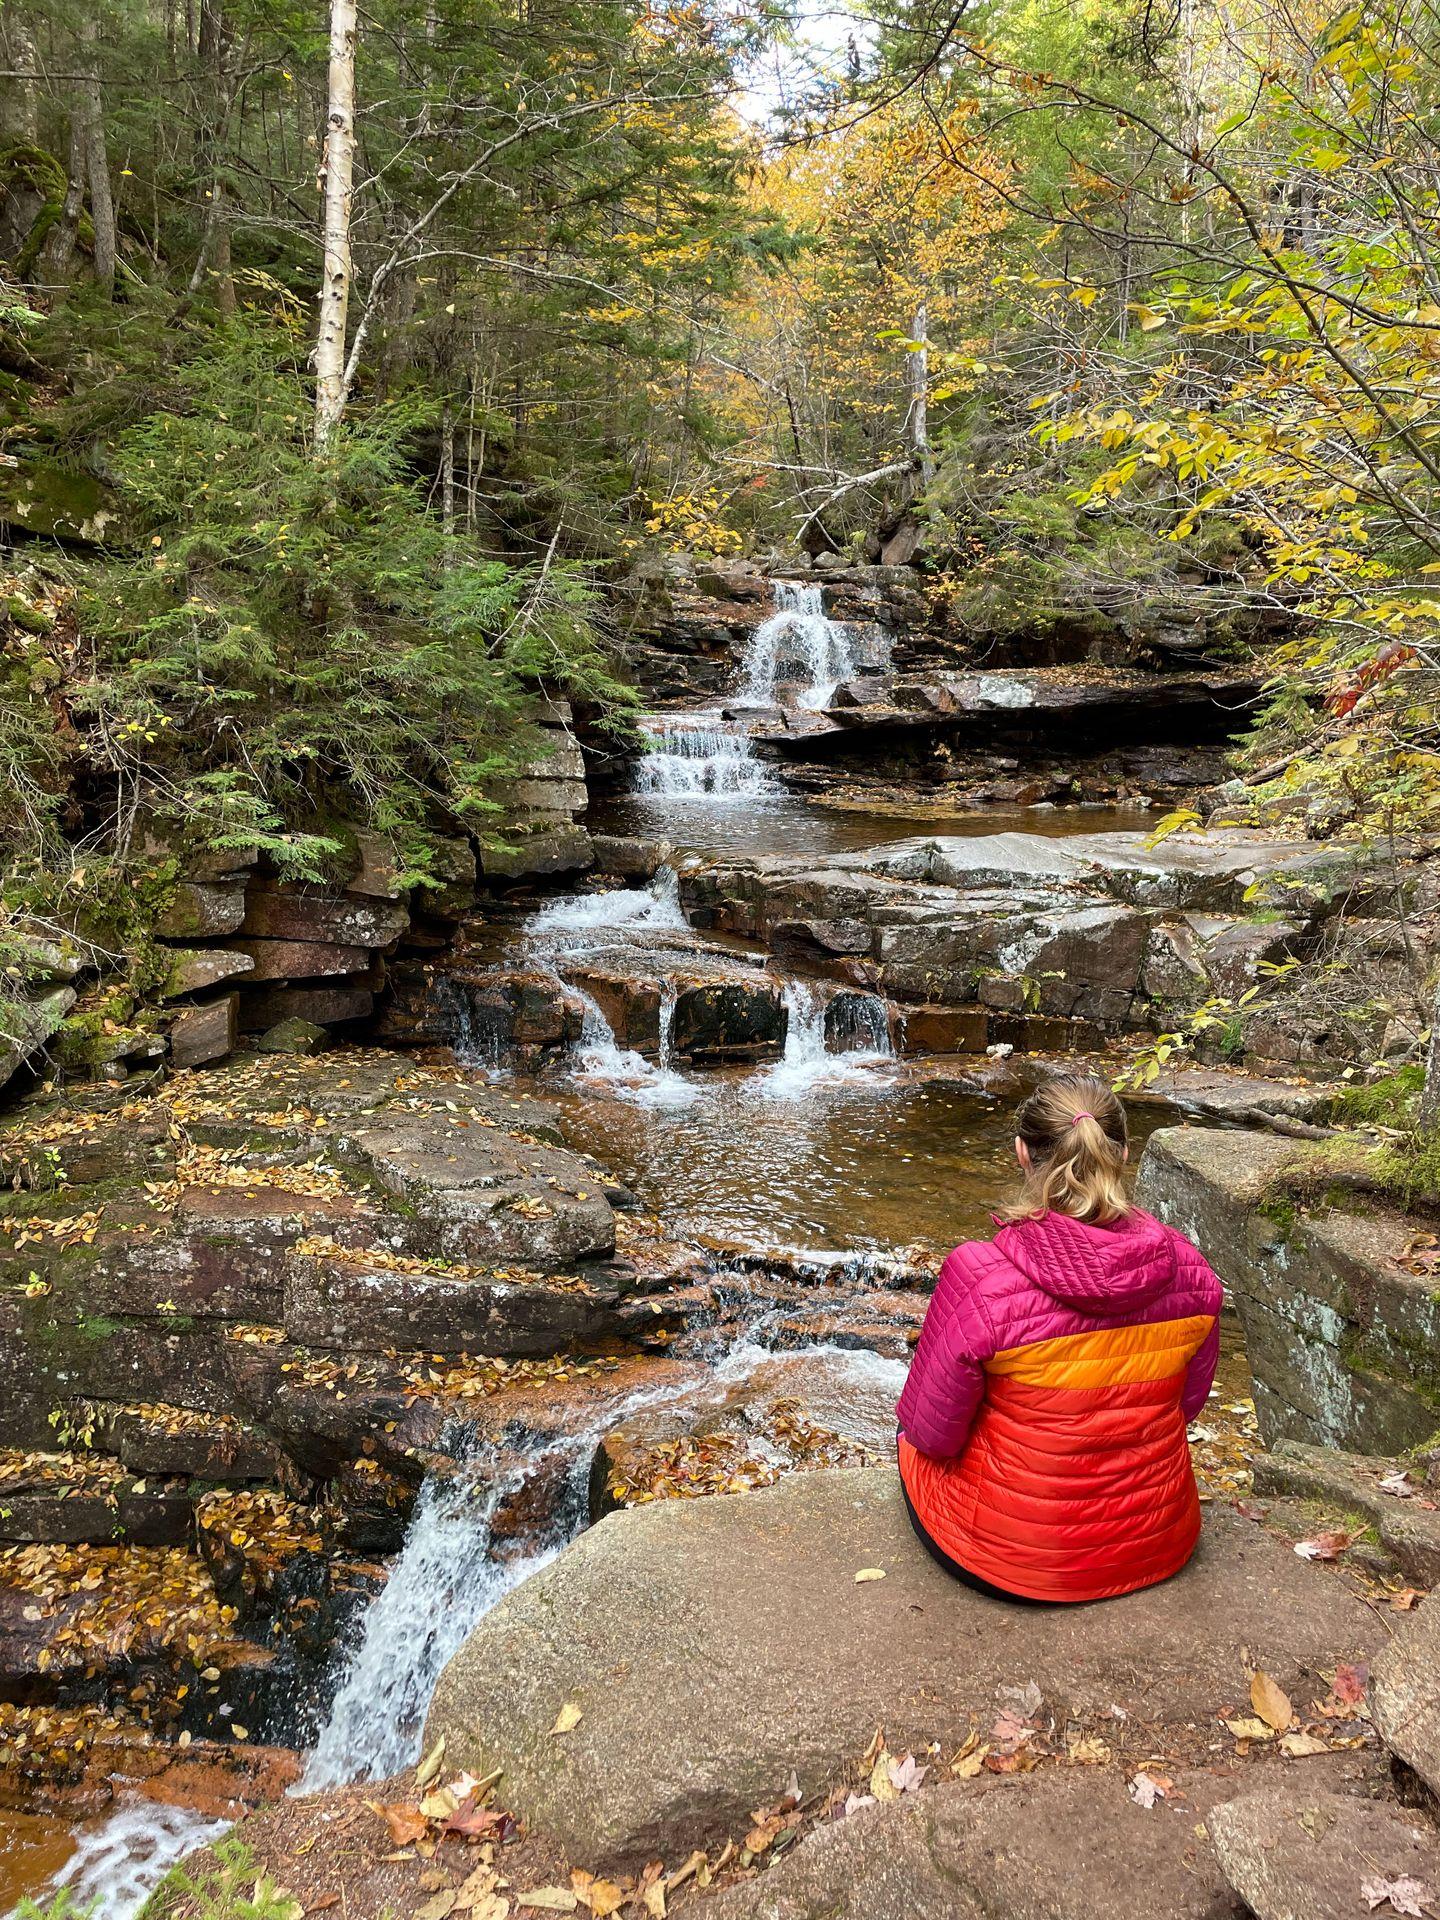 Lydia sitting in front of Bemis Falls along the Bemis Brook Trail